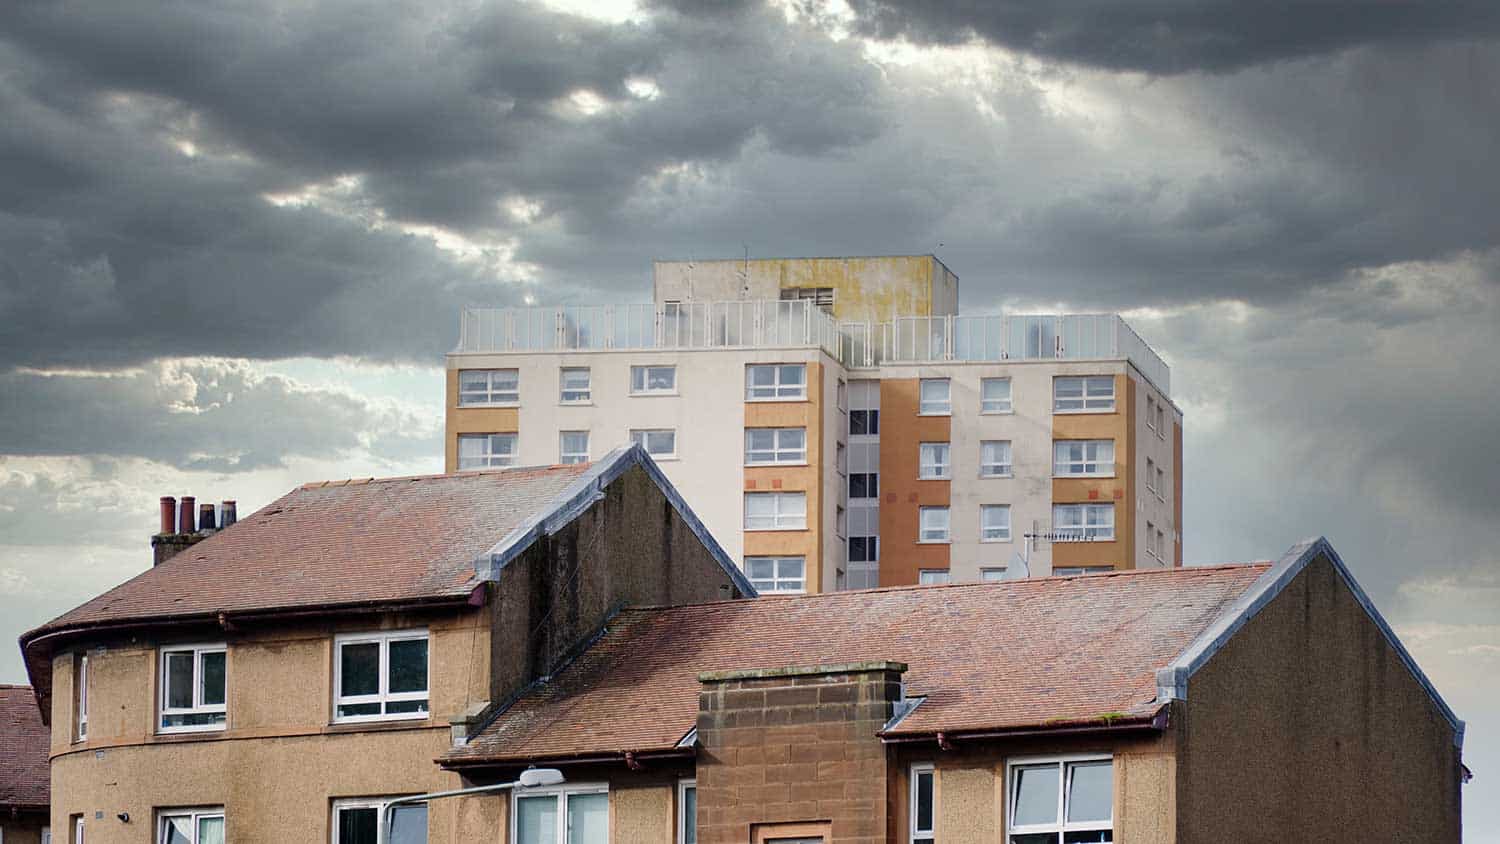 Block of flats towers ominously over houses